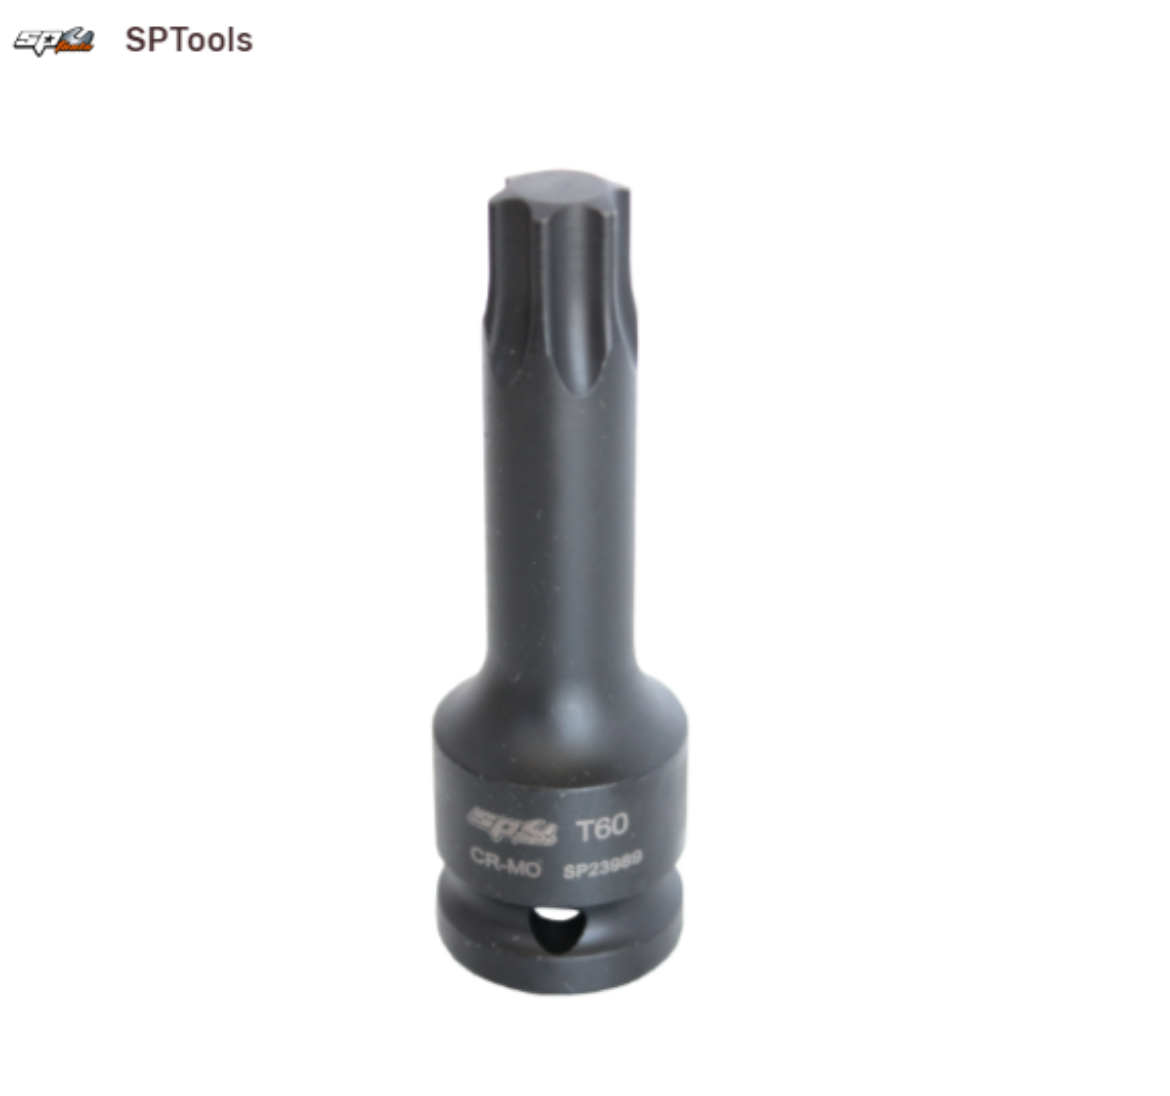 Picture of SOCKET IMPACT 1/2"DR TORX T55 SP TOOLS